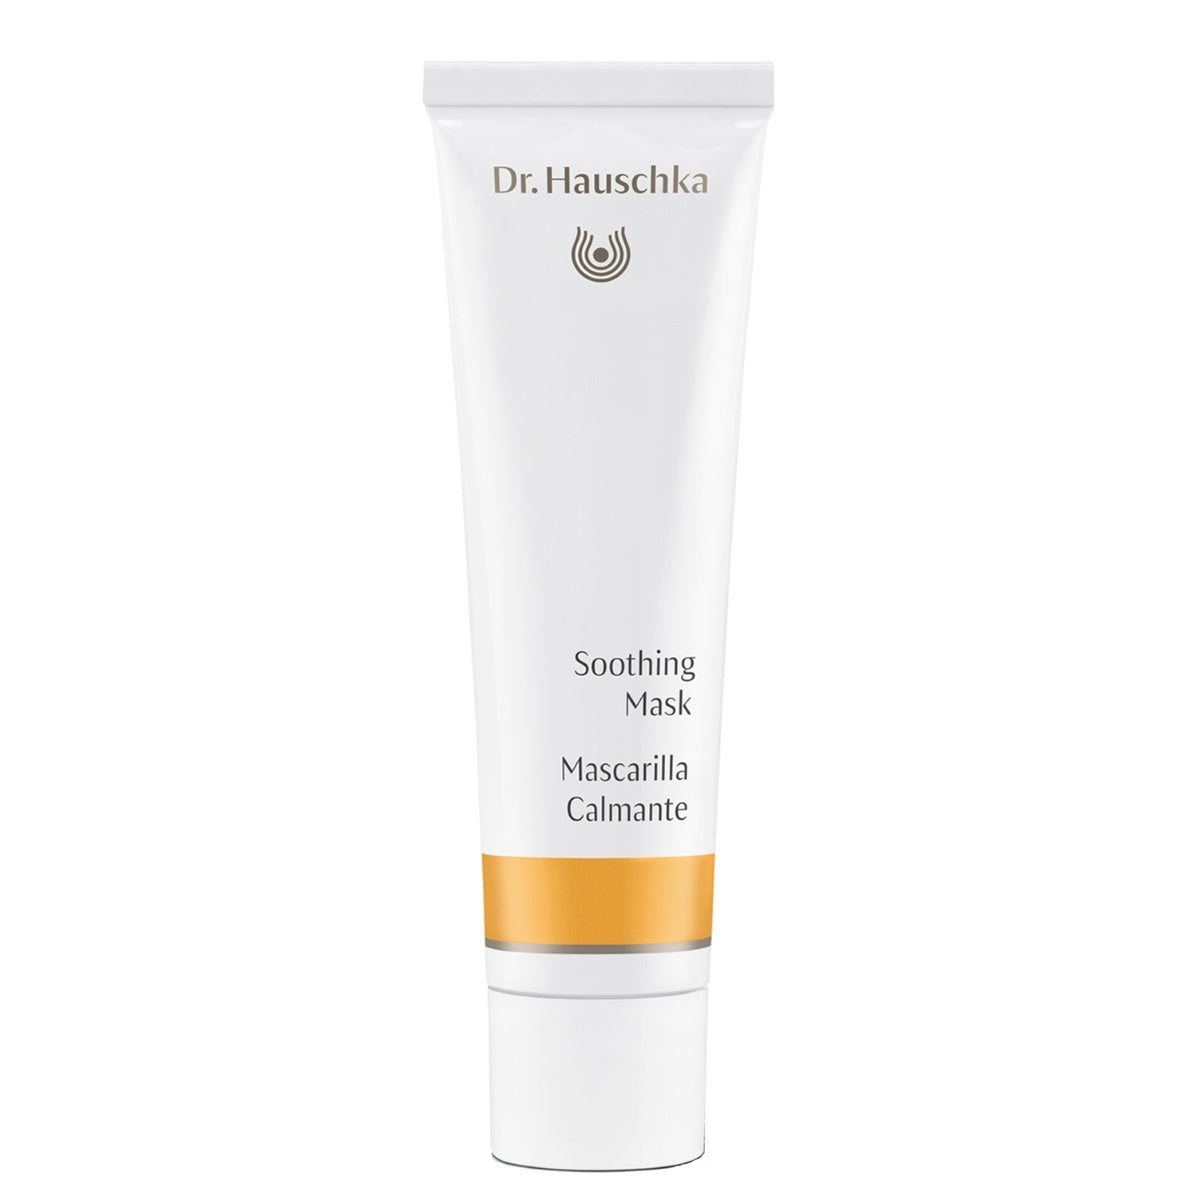 Primary image of Soothing Mask for Sensitive Skin